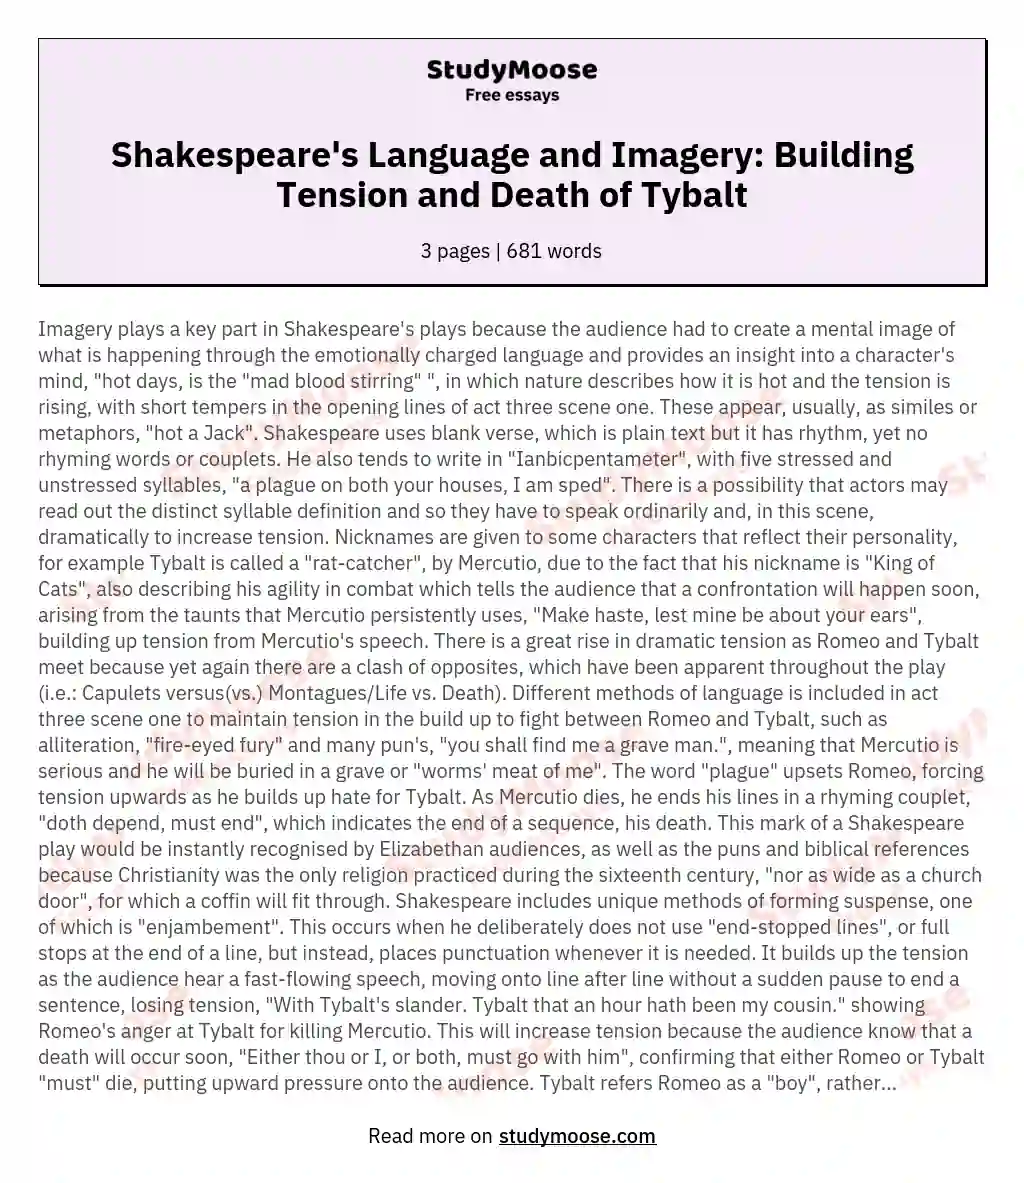 Shakespeare's Language and Imagery: Building Tension and Death of Tybalt essay